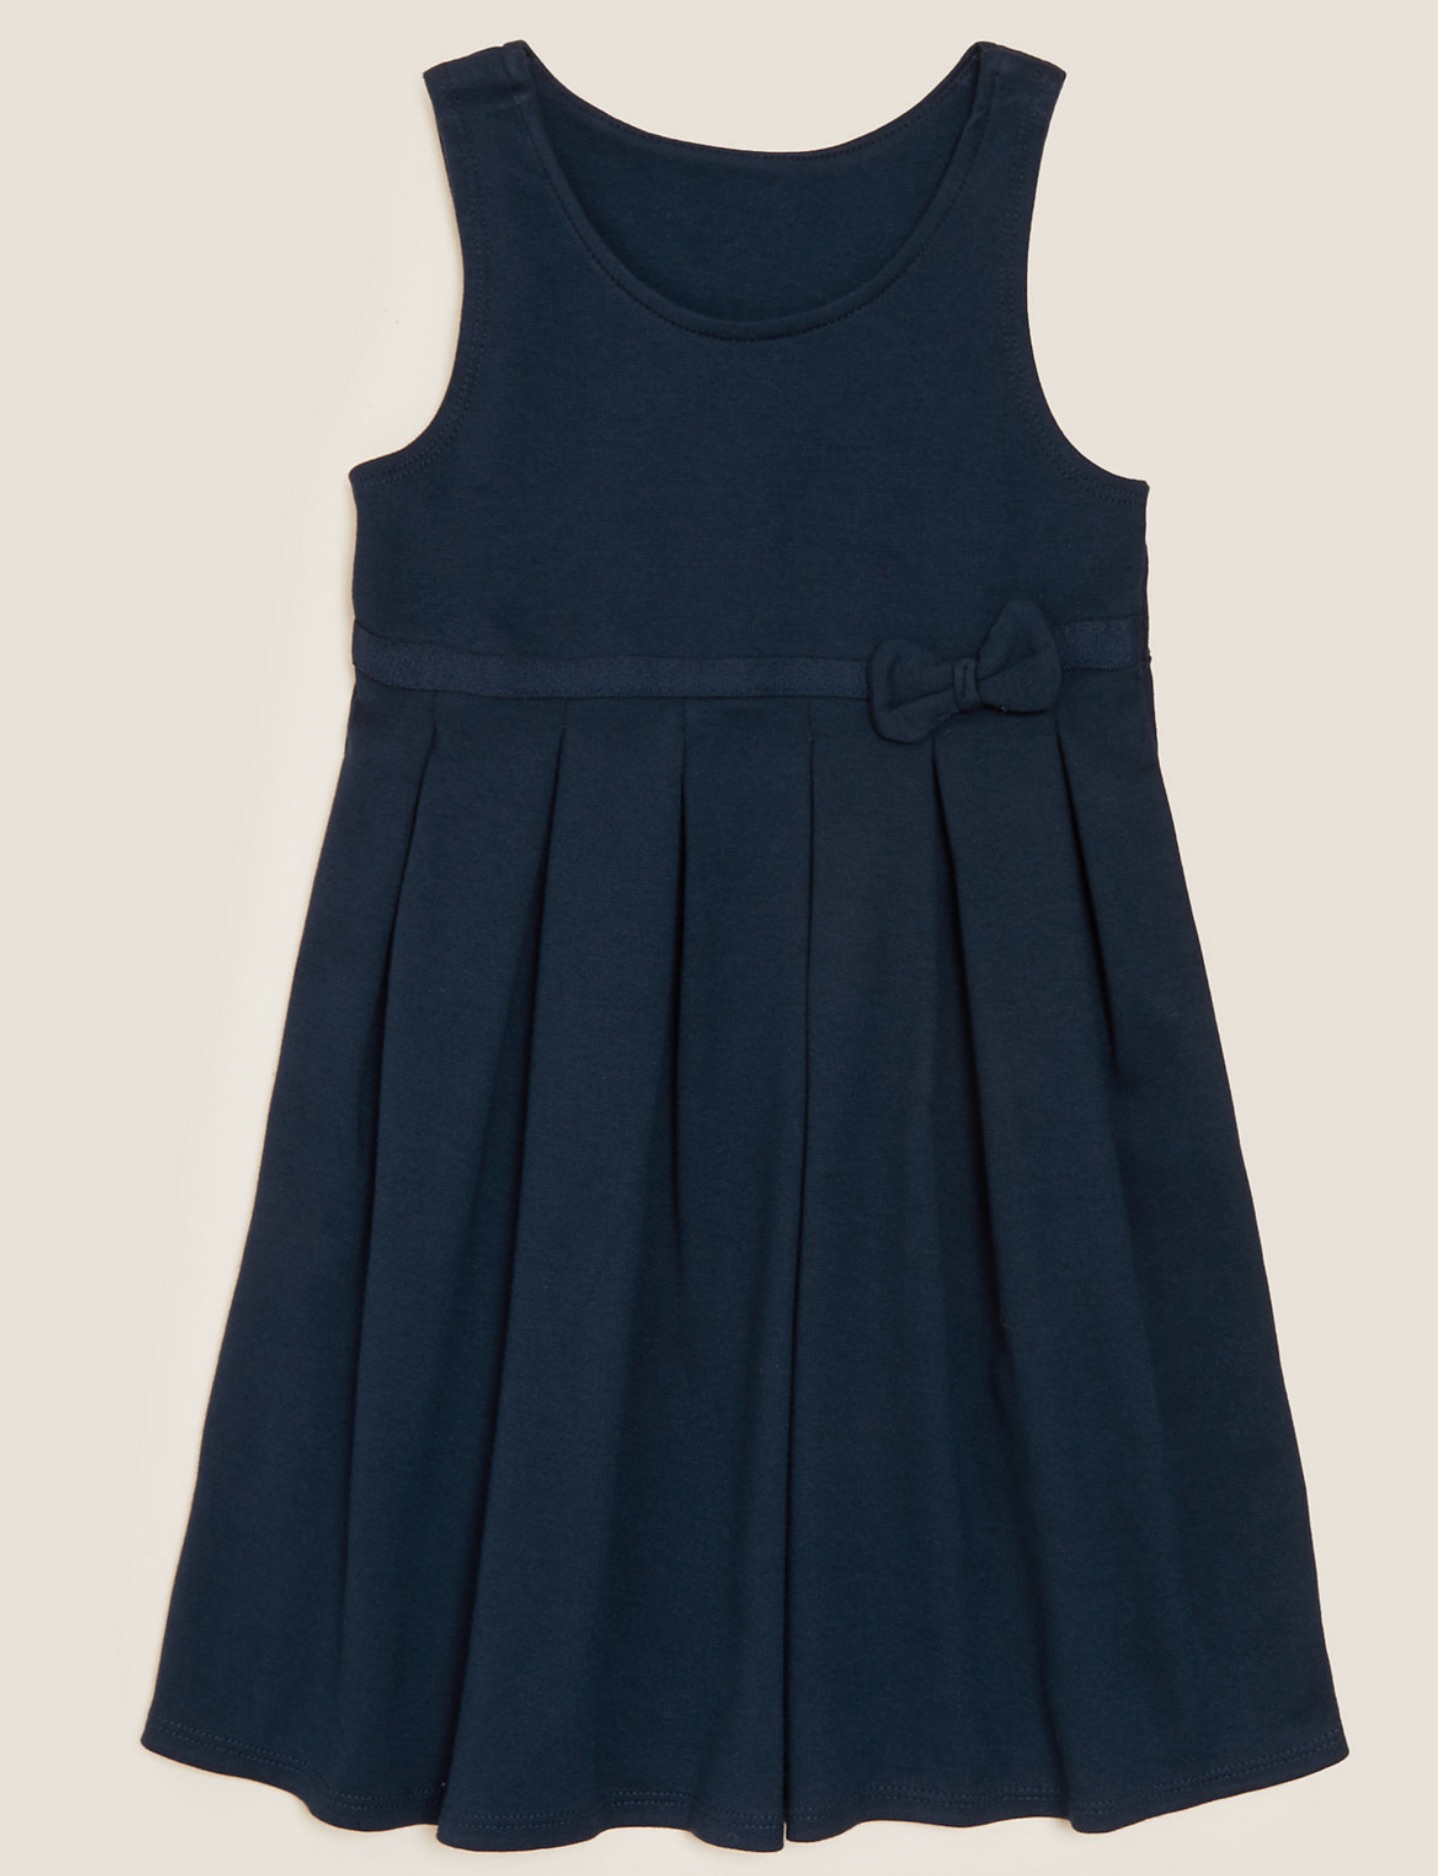 Girls' Navy Jersey Pinafore Dress, Pleated/Gathered Waist 4-5 Y